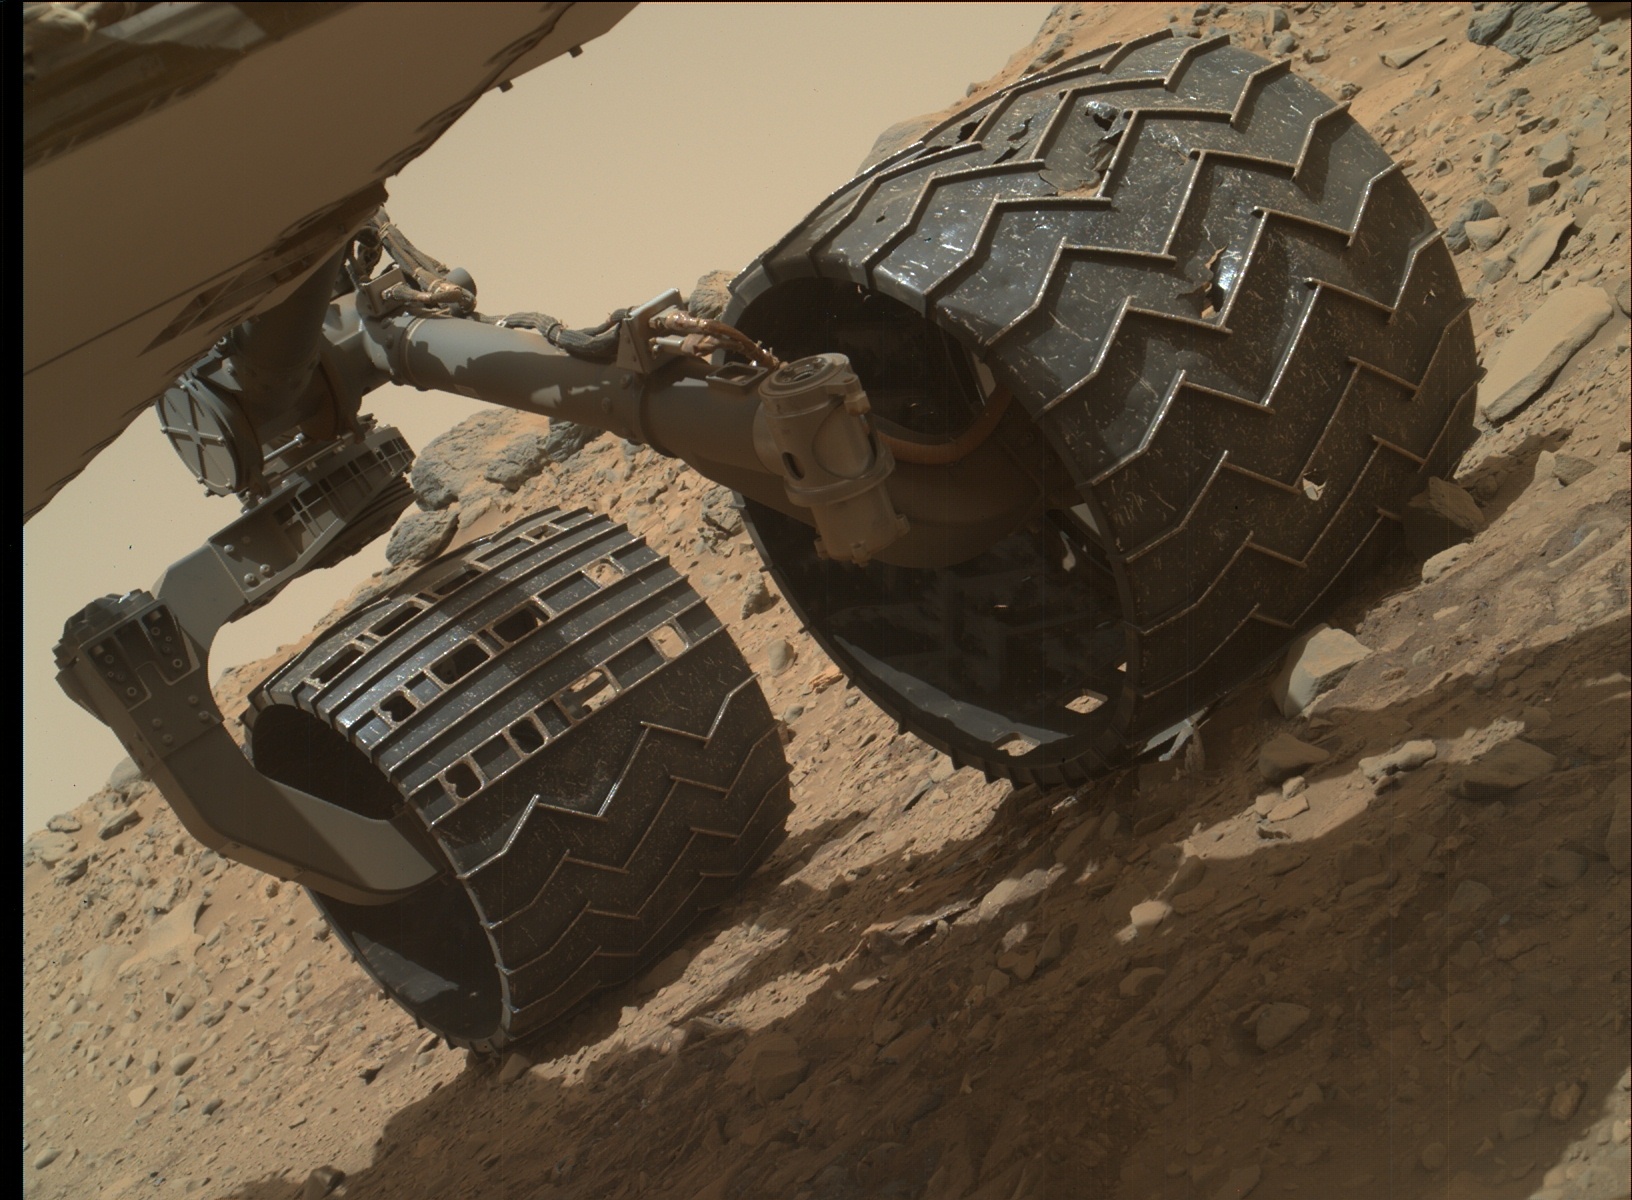 Nasa's Mars rover Curiosity acquired this image using its Mars Hand Lens Imager (MAHLI) on Sol 729